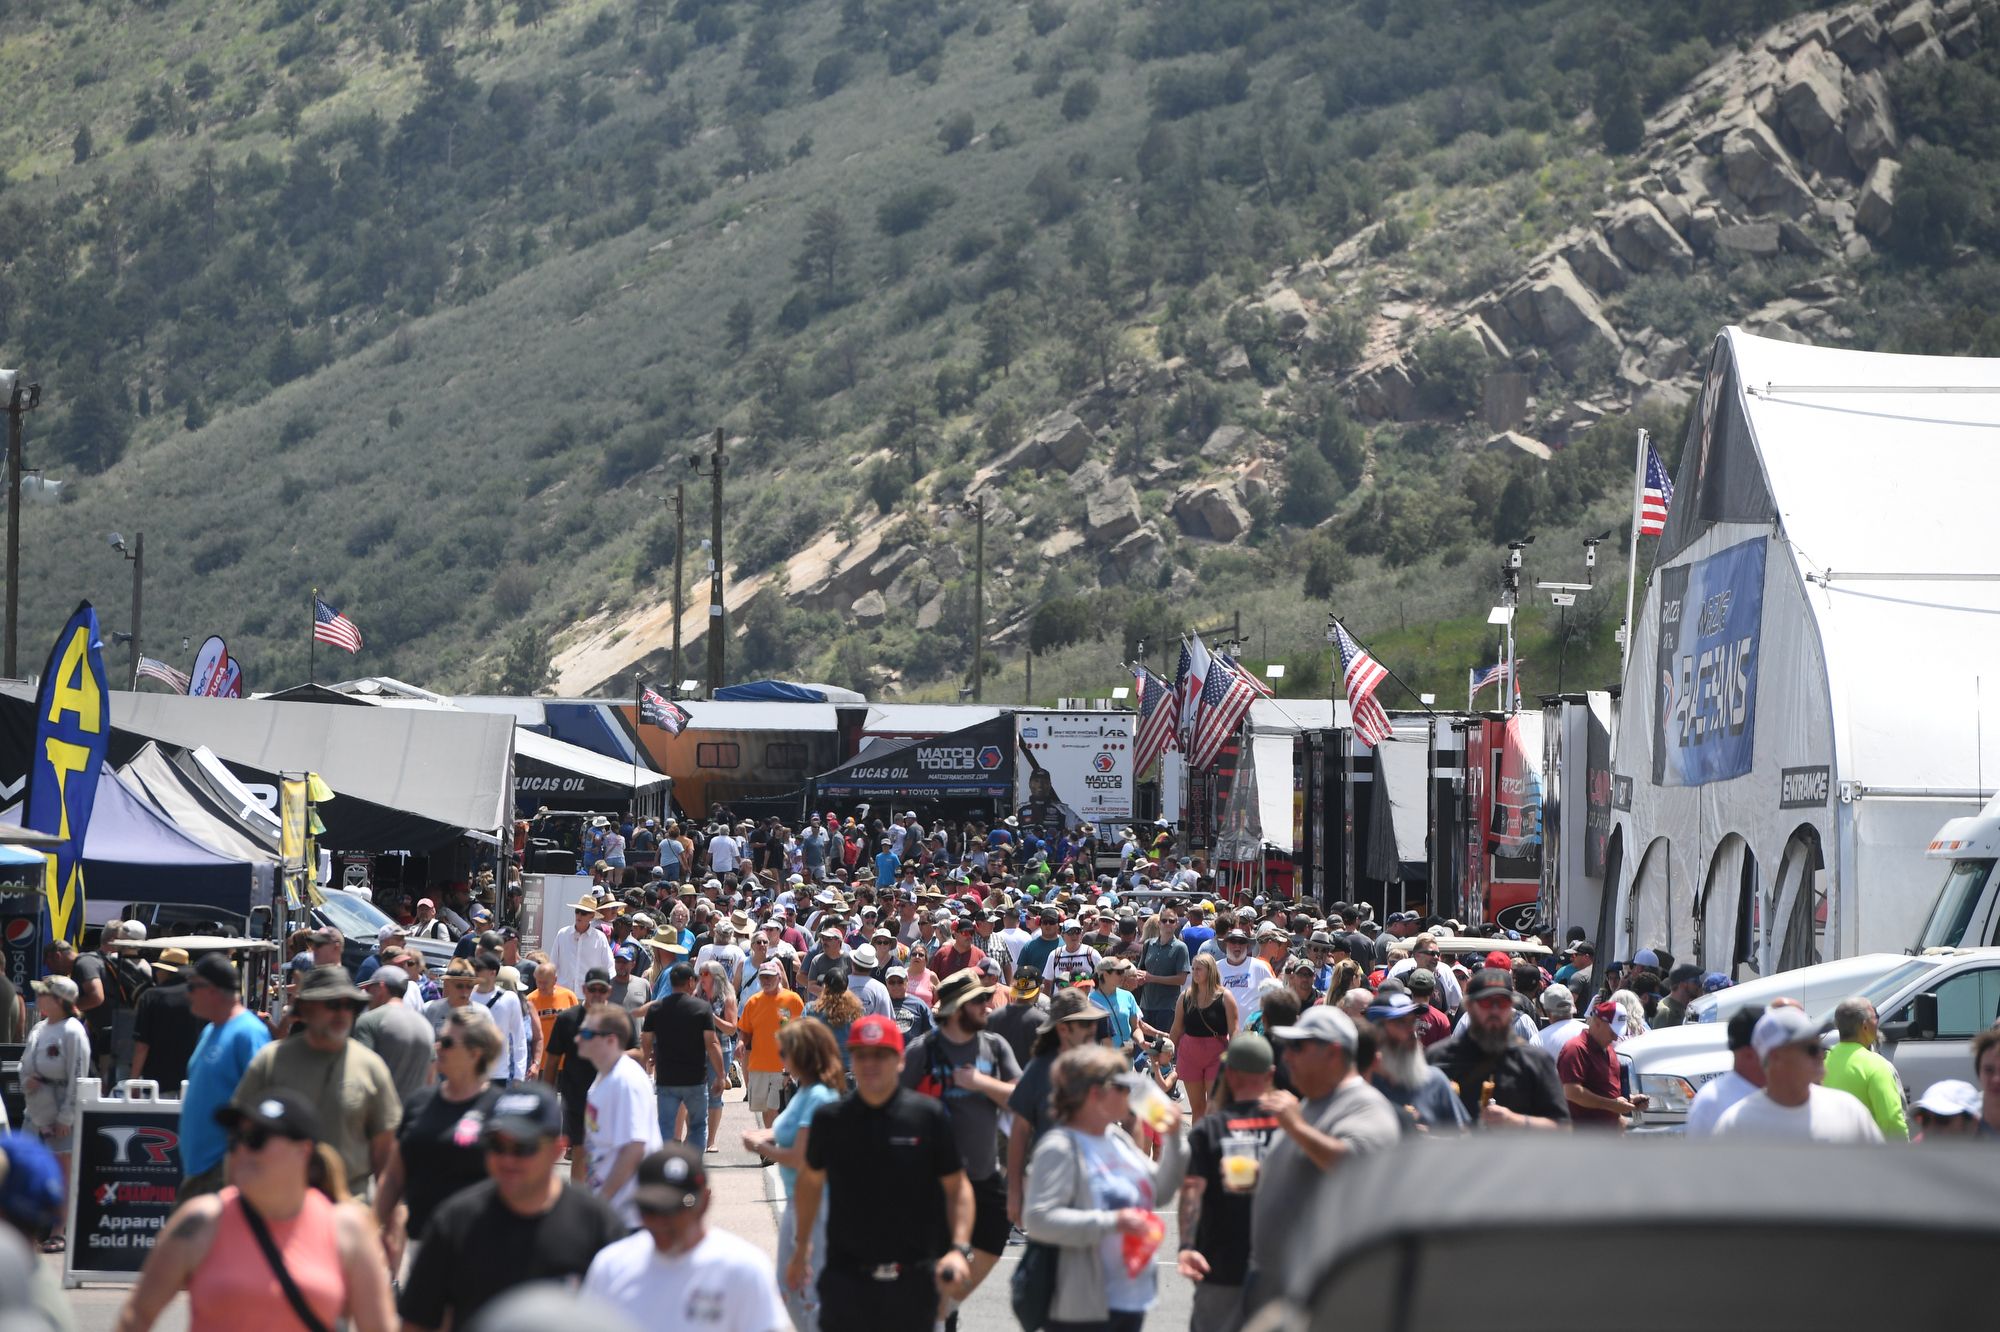 WINNERS CROWNED AT THE FINAL NHRA MILE-HIGH NATIONALS BEFORE A SELLOUT  CROWD